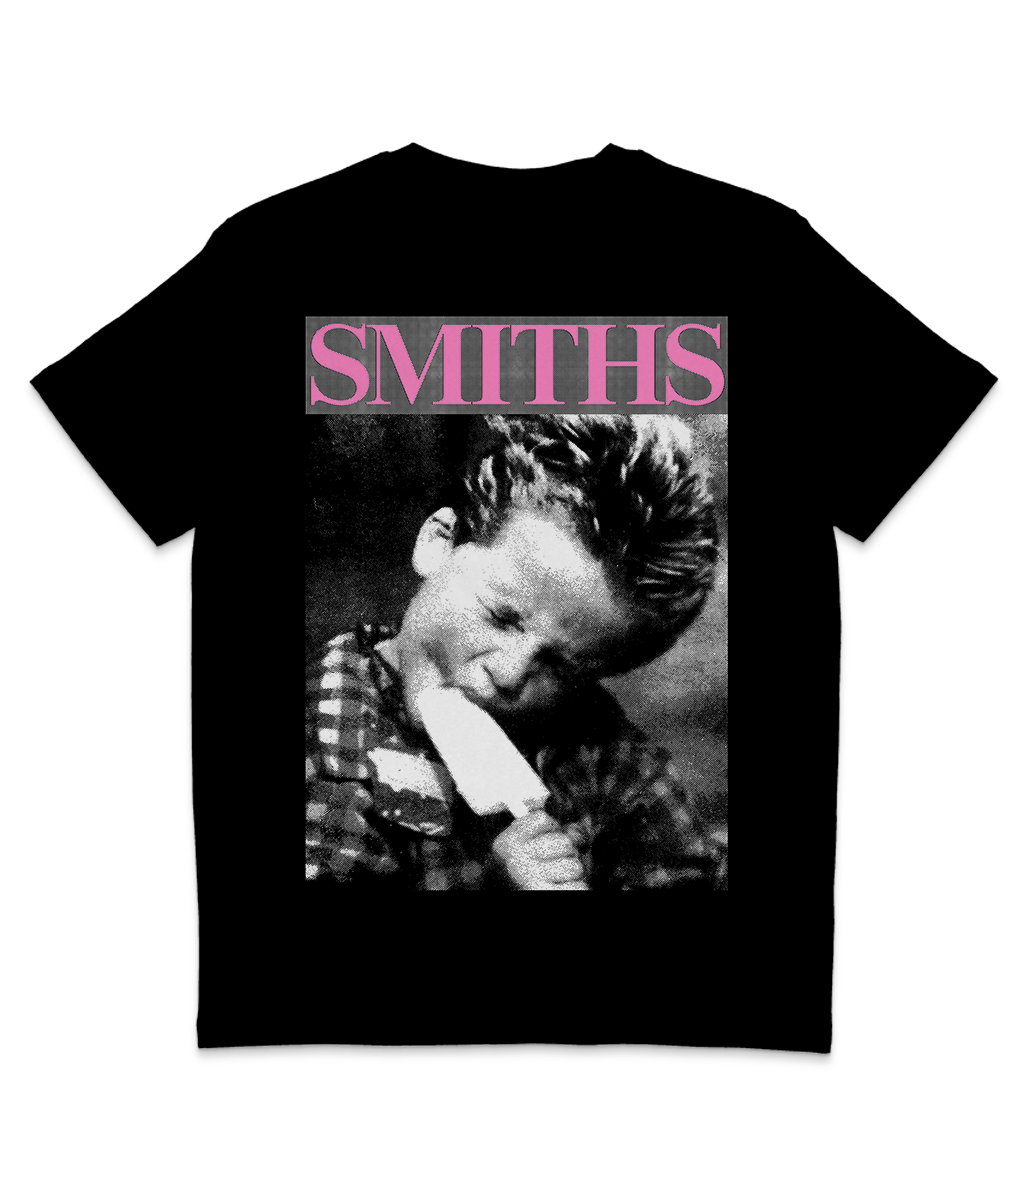 THE SMITHS - 'Boy With Lolly' - 1986 - Pink & Black - Black Shirt